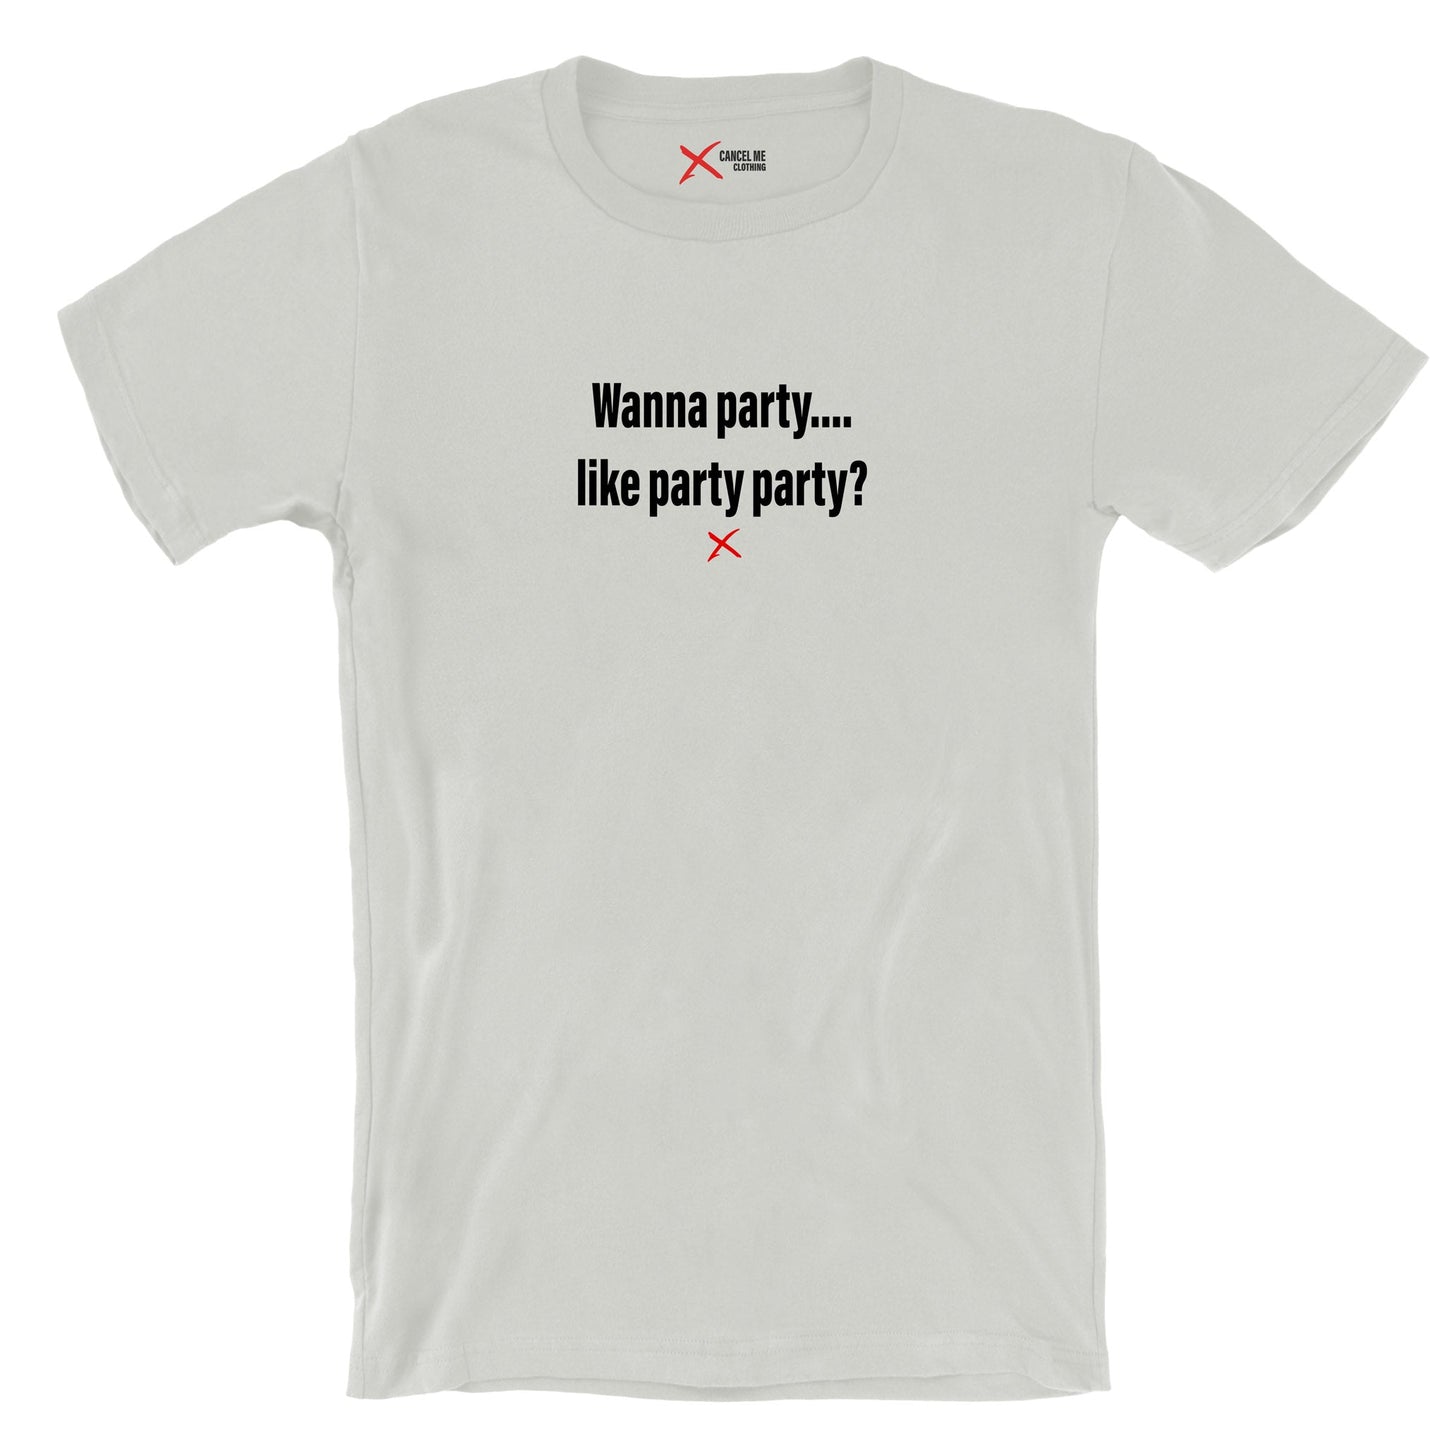 Wanna party.... like party party? - Shirt